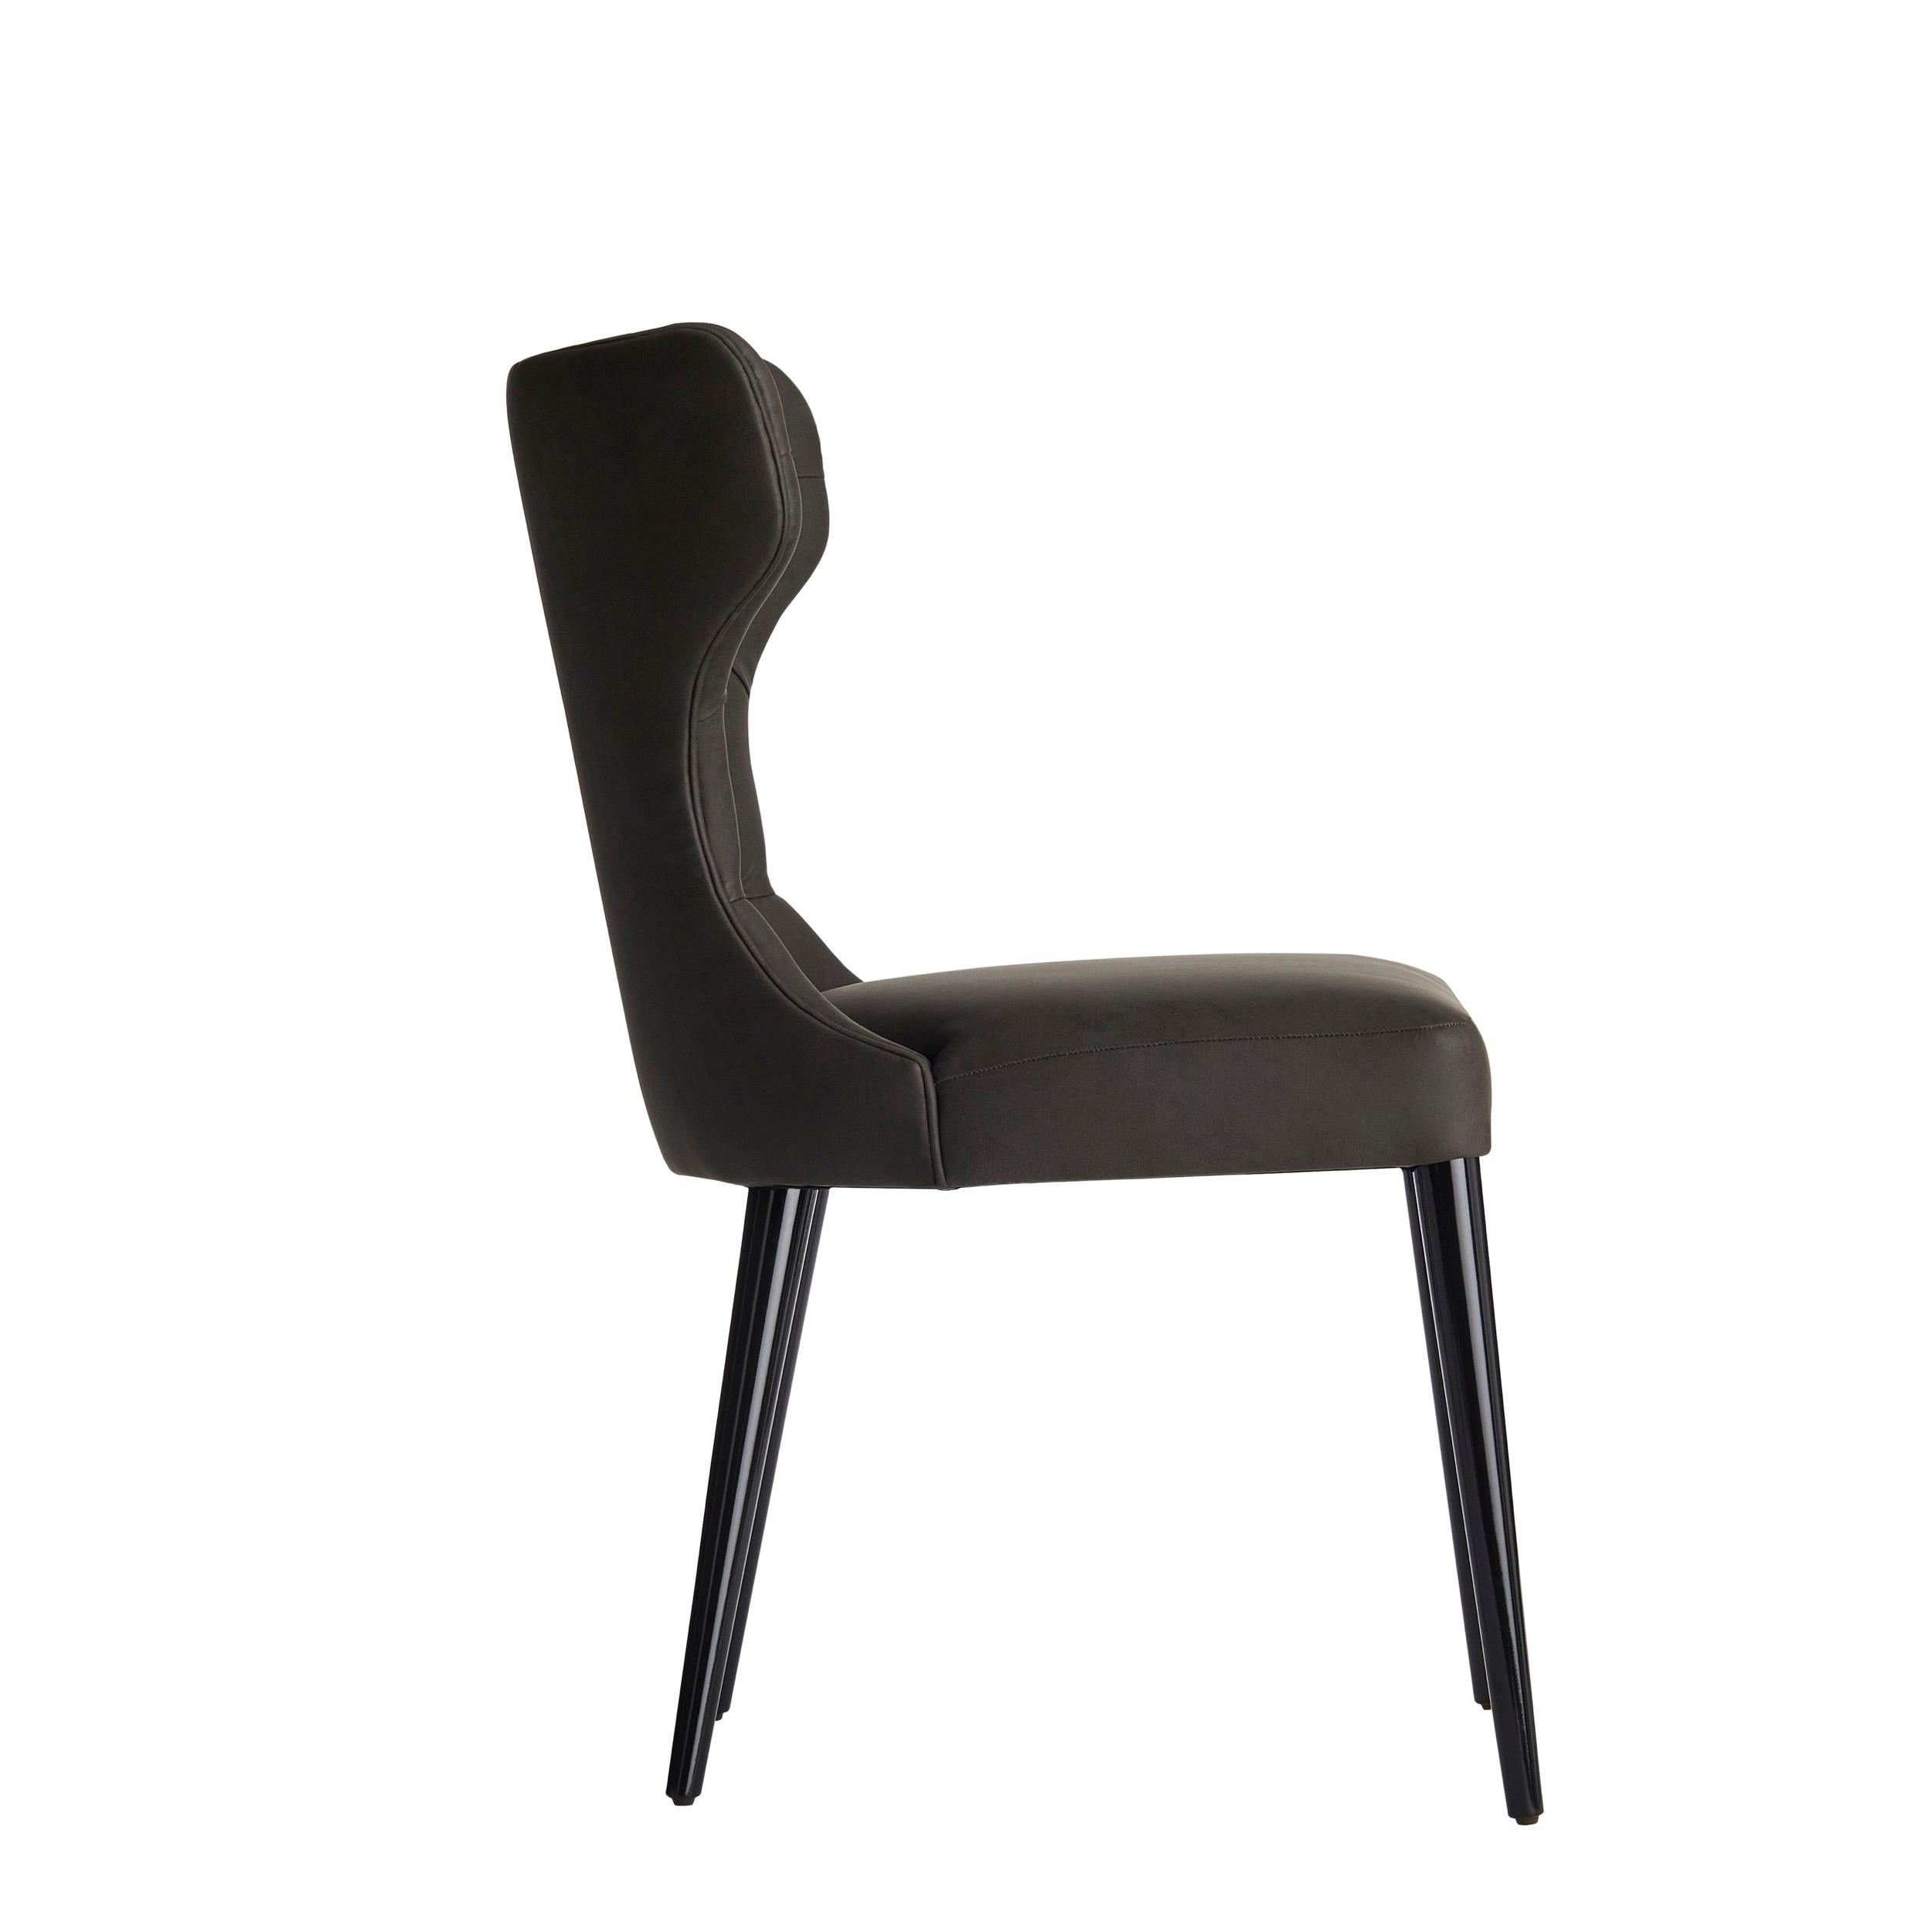 FORTUNA is a dining chair with a well-balanced design, with an enveloping back, which gives a feeling of extreme comfort, characterized by the elegant tufted details.‎ The legs are lacquered, available in a range of colours, with matt or glossy